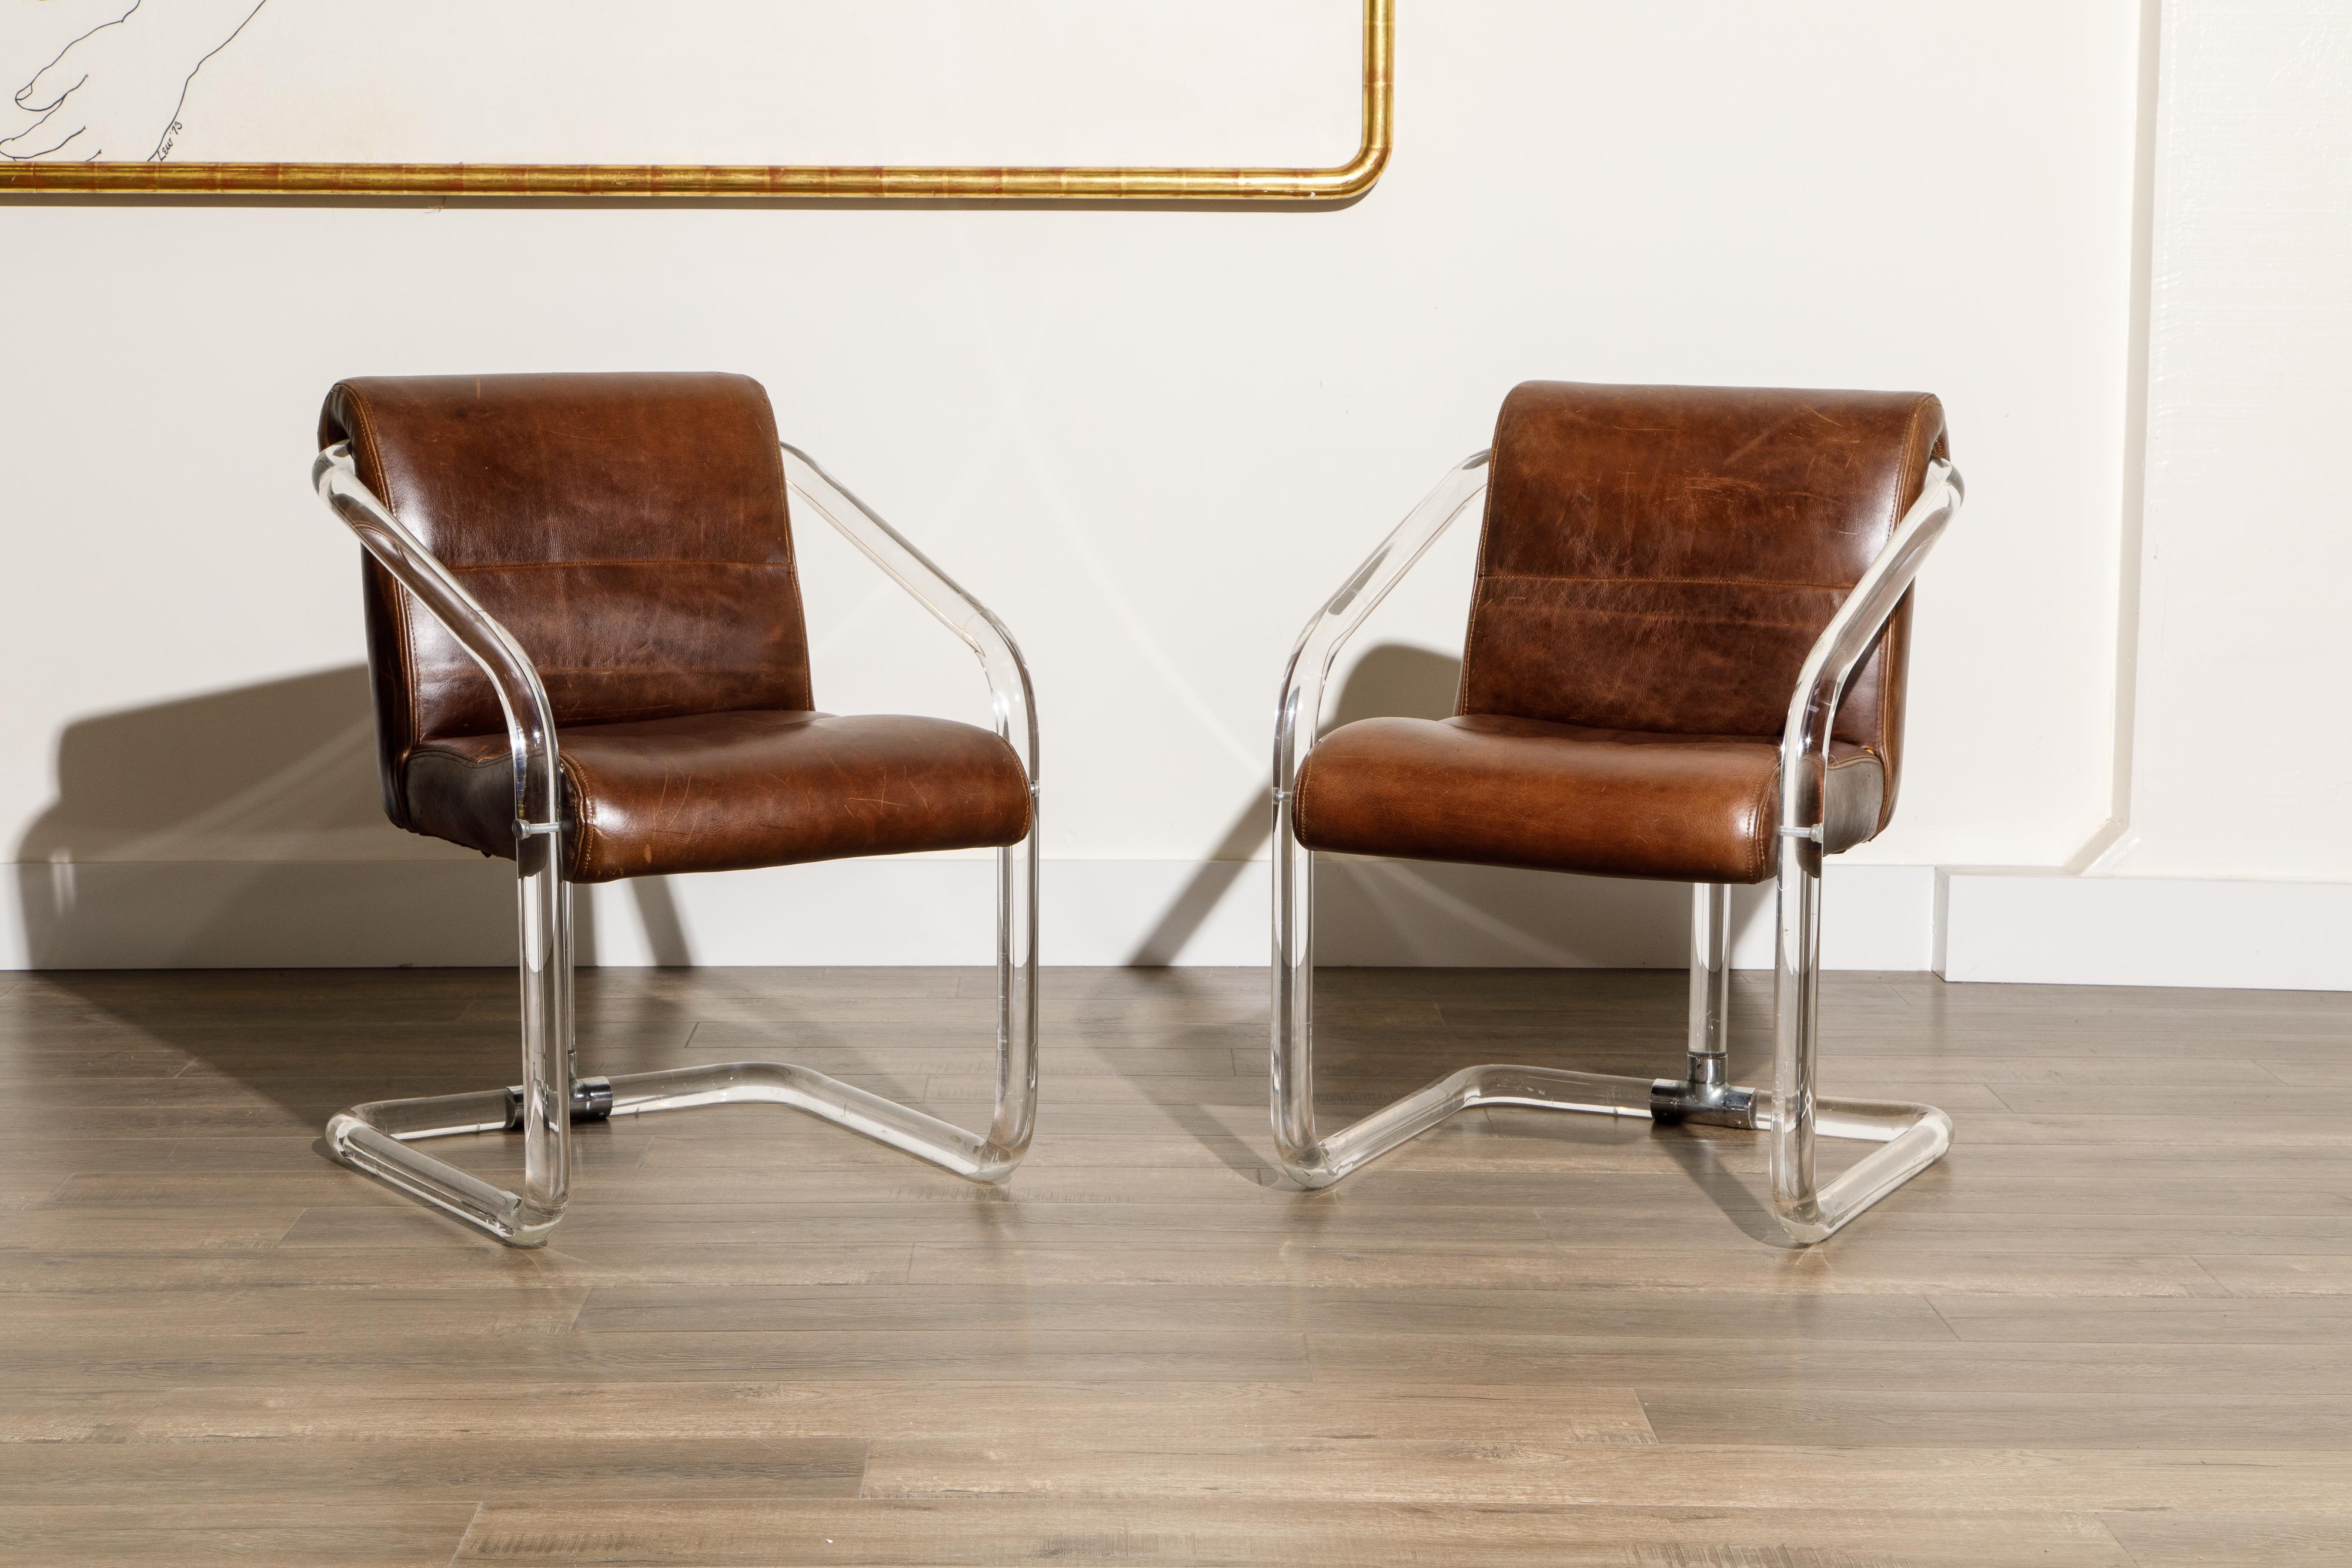 This gorgeous pair of lucite, leather and chrome armchairs by Lion in Frost (both chairs are signed), circa 1970s, are signed on the lucite post near the base and are in good vintage condition with lightly patinated and thick brown colored leather.